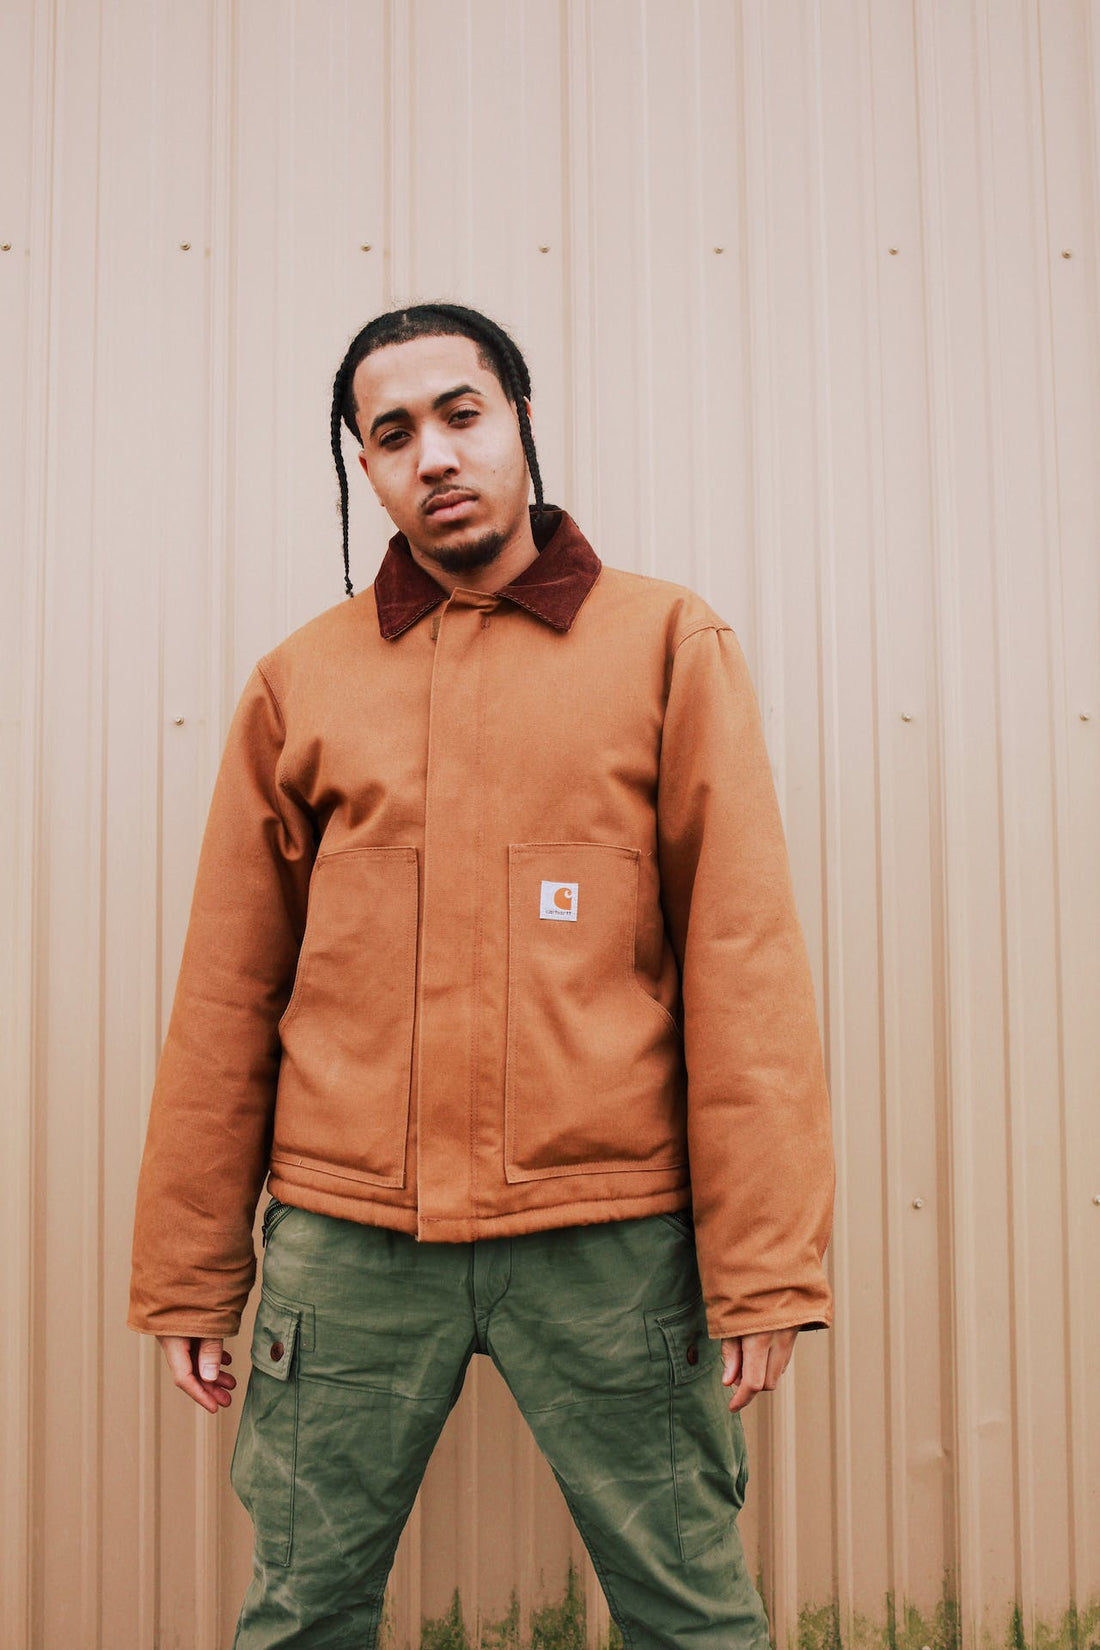 Unpacking the Carhartt Detroit Jacket: What Makes It a Vintage Classic?